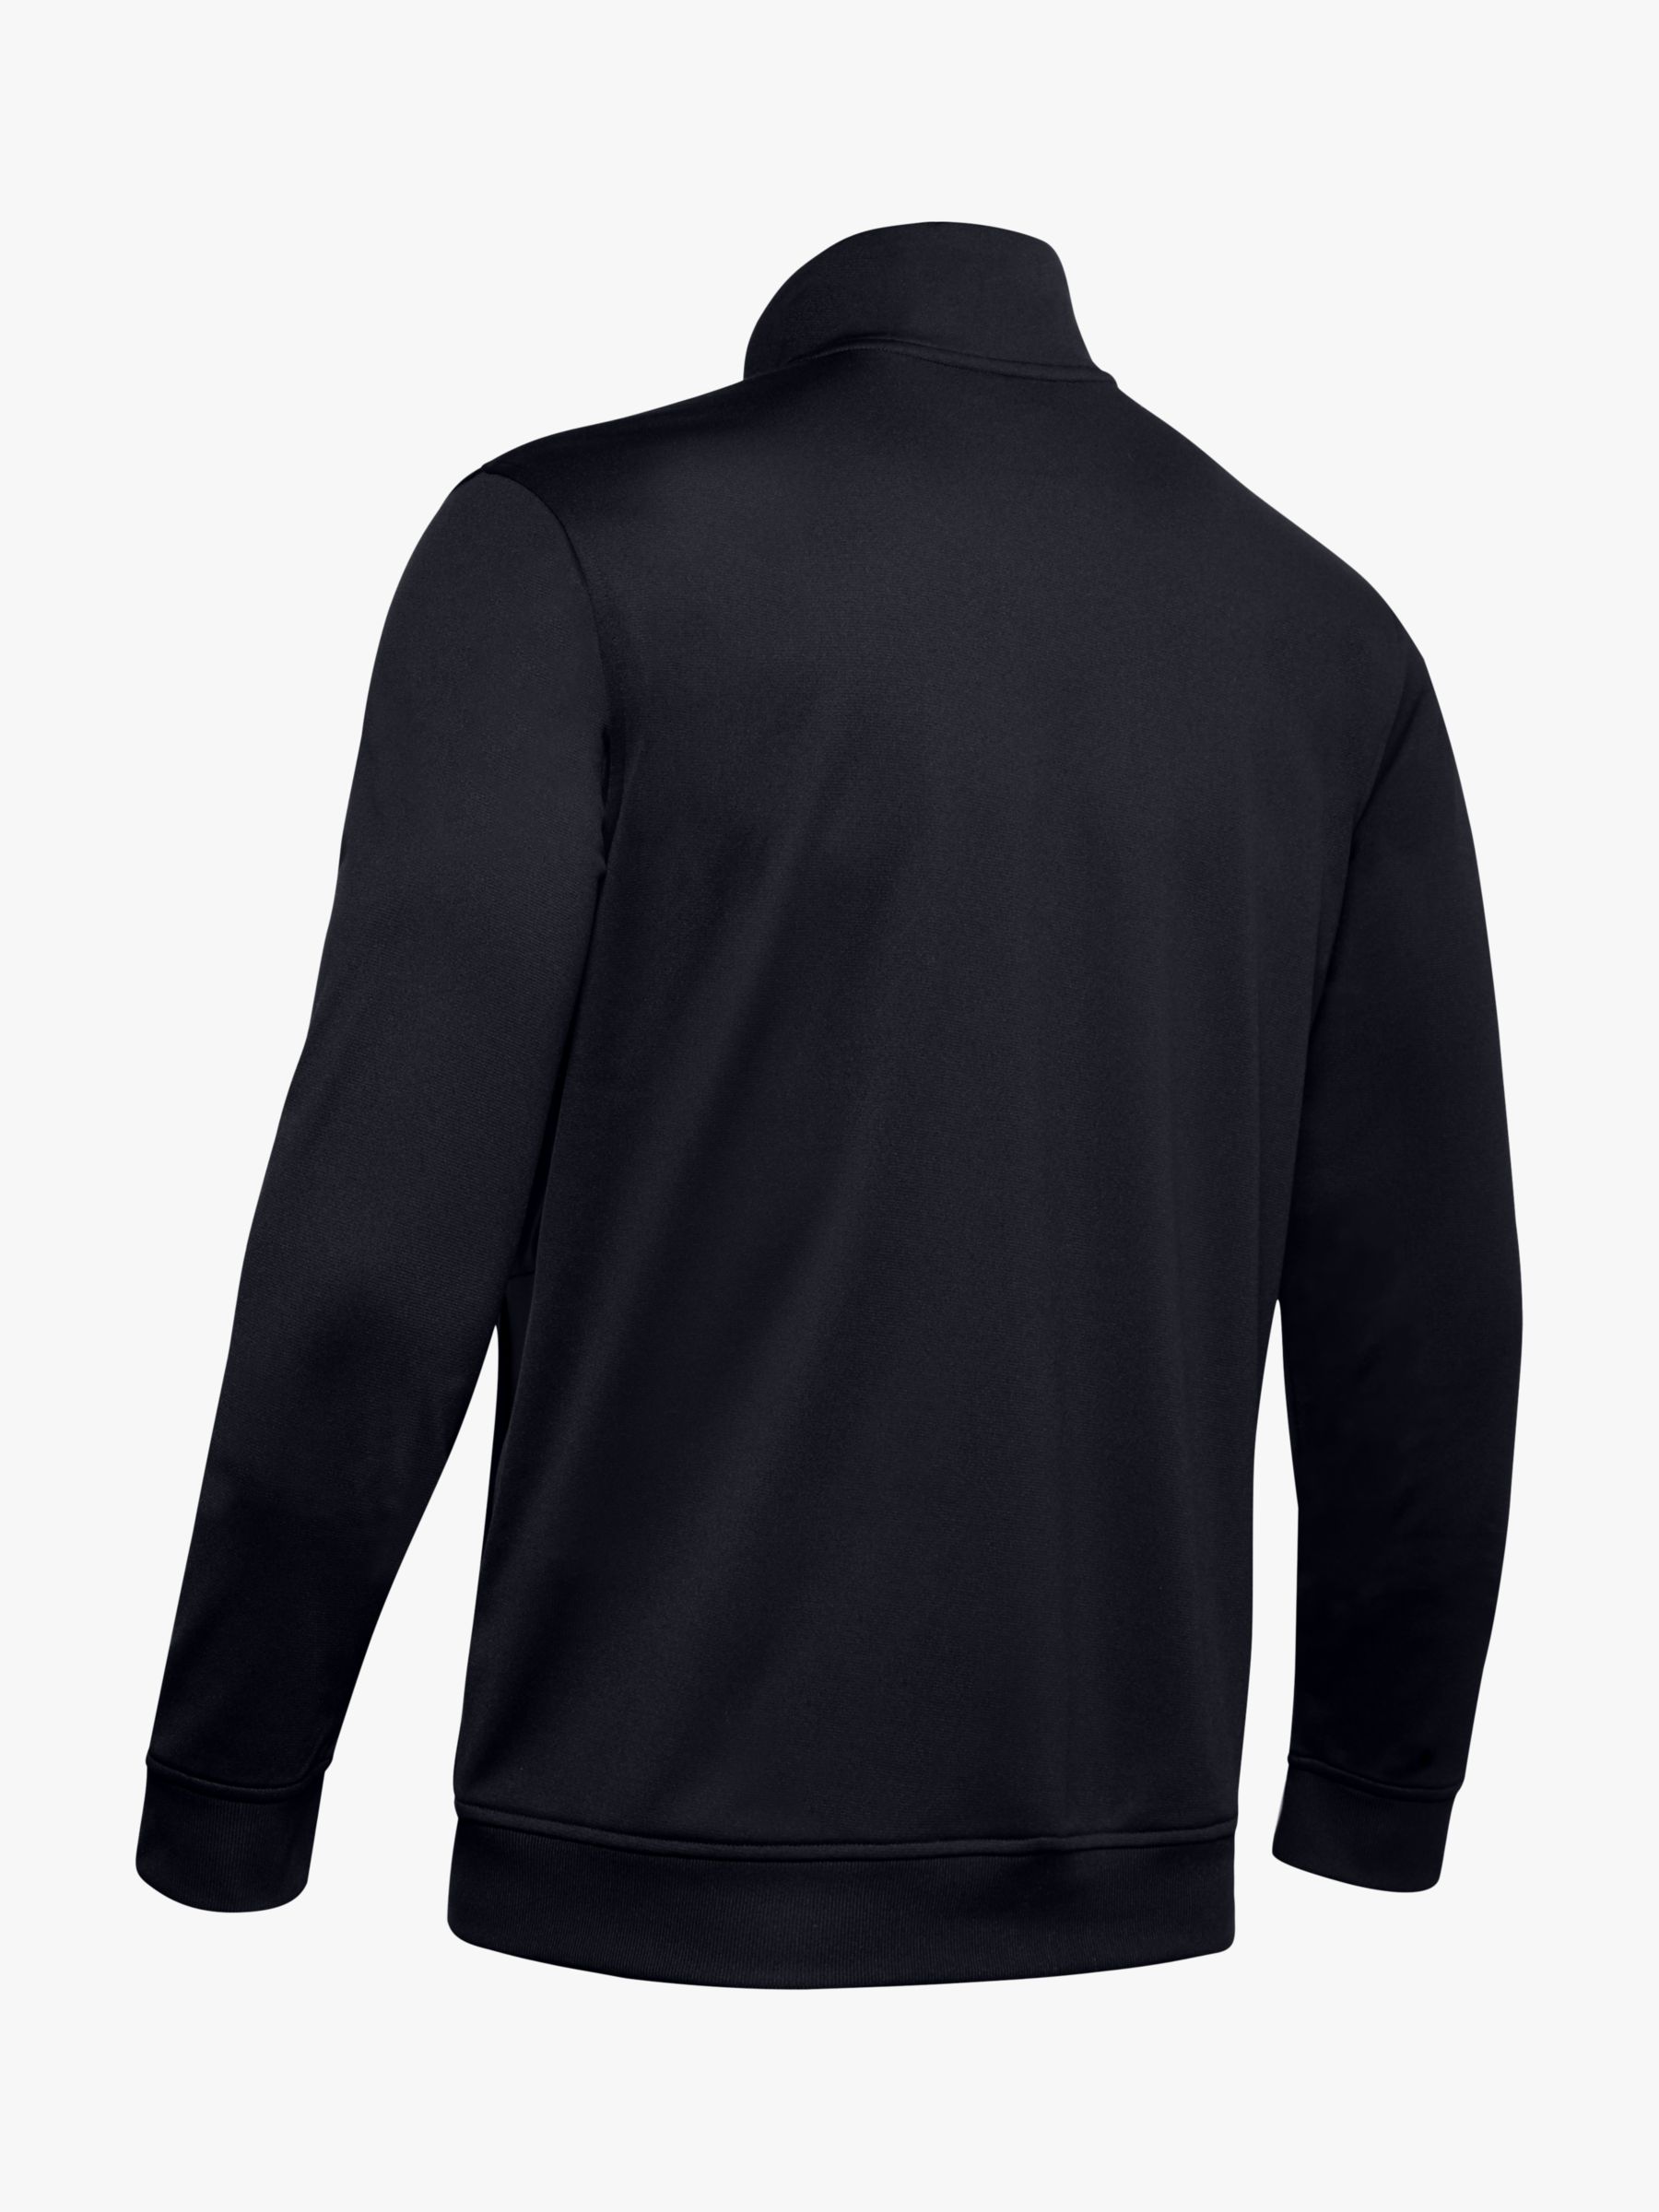 Under Armour Sportstyle Tricot Men's Gym Jacket